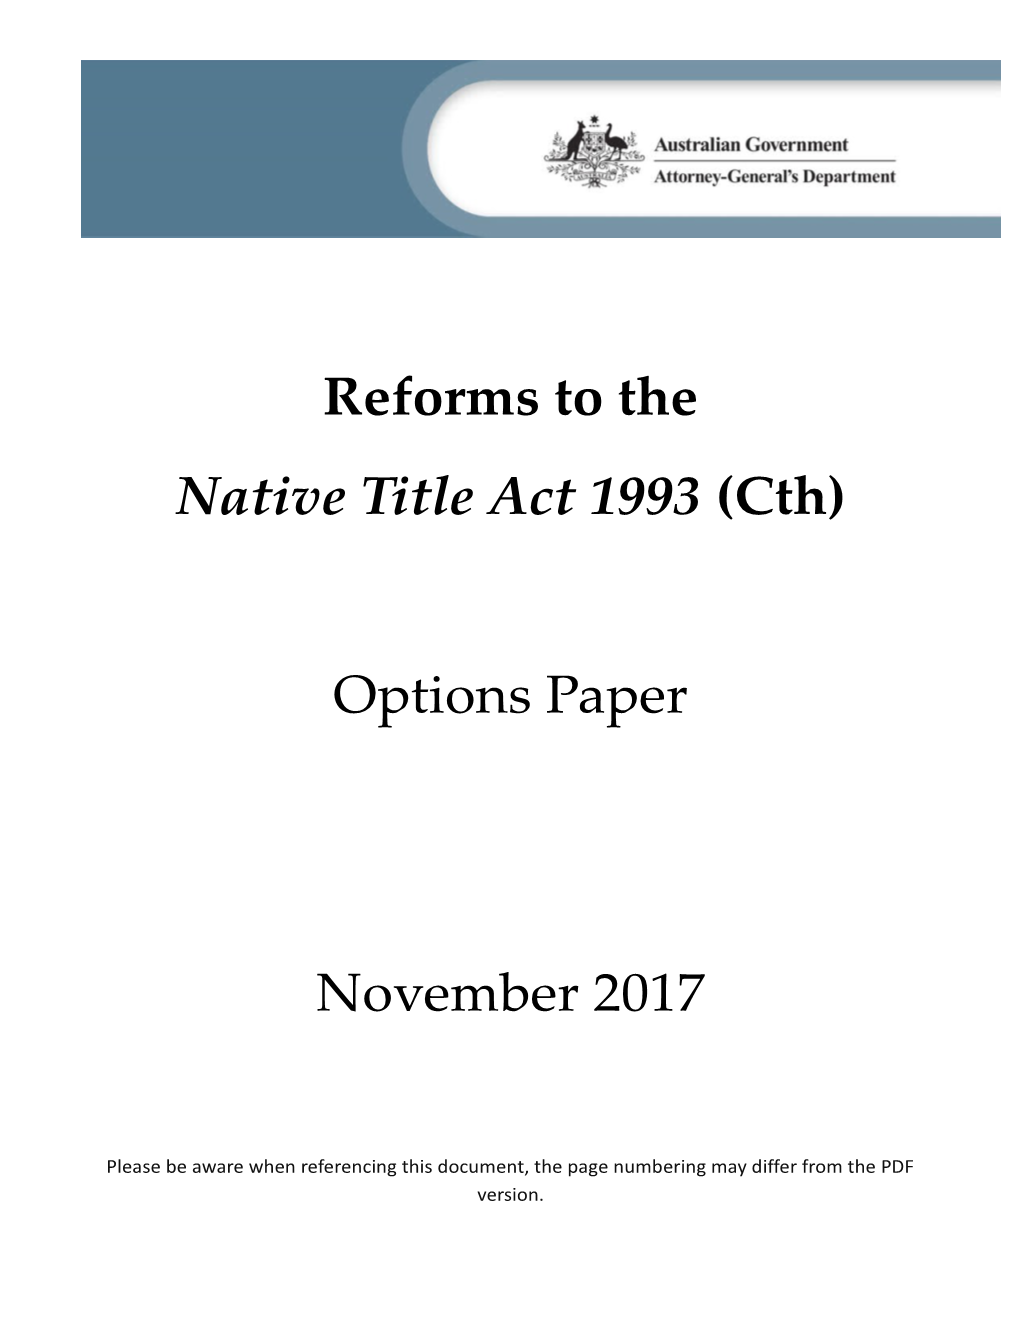 Options Paper Proposed Reforms to the Native Title Act 1993